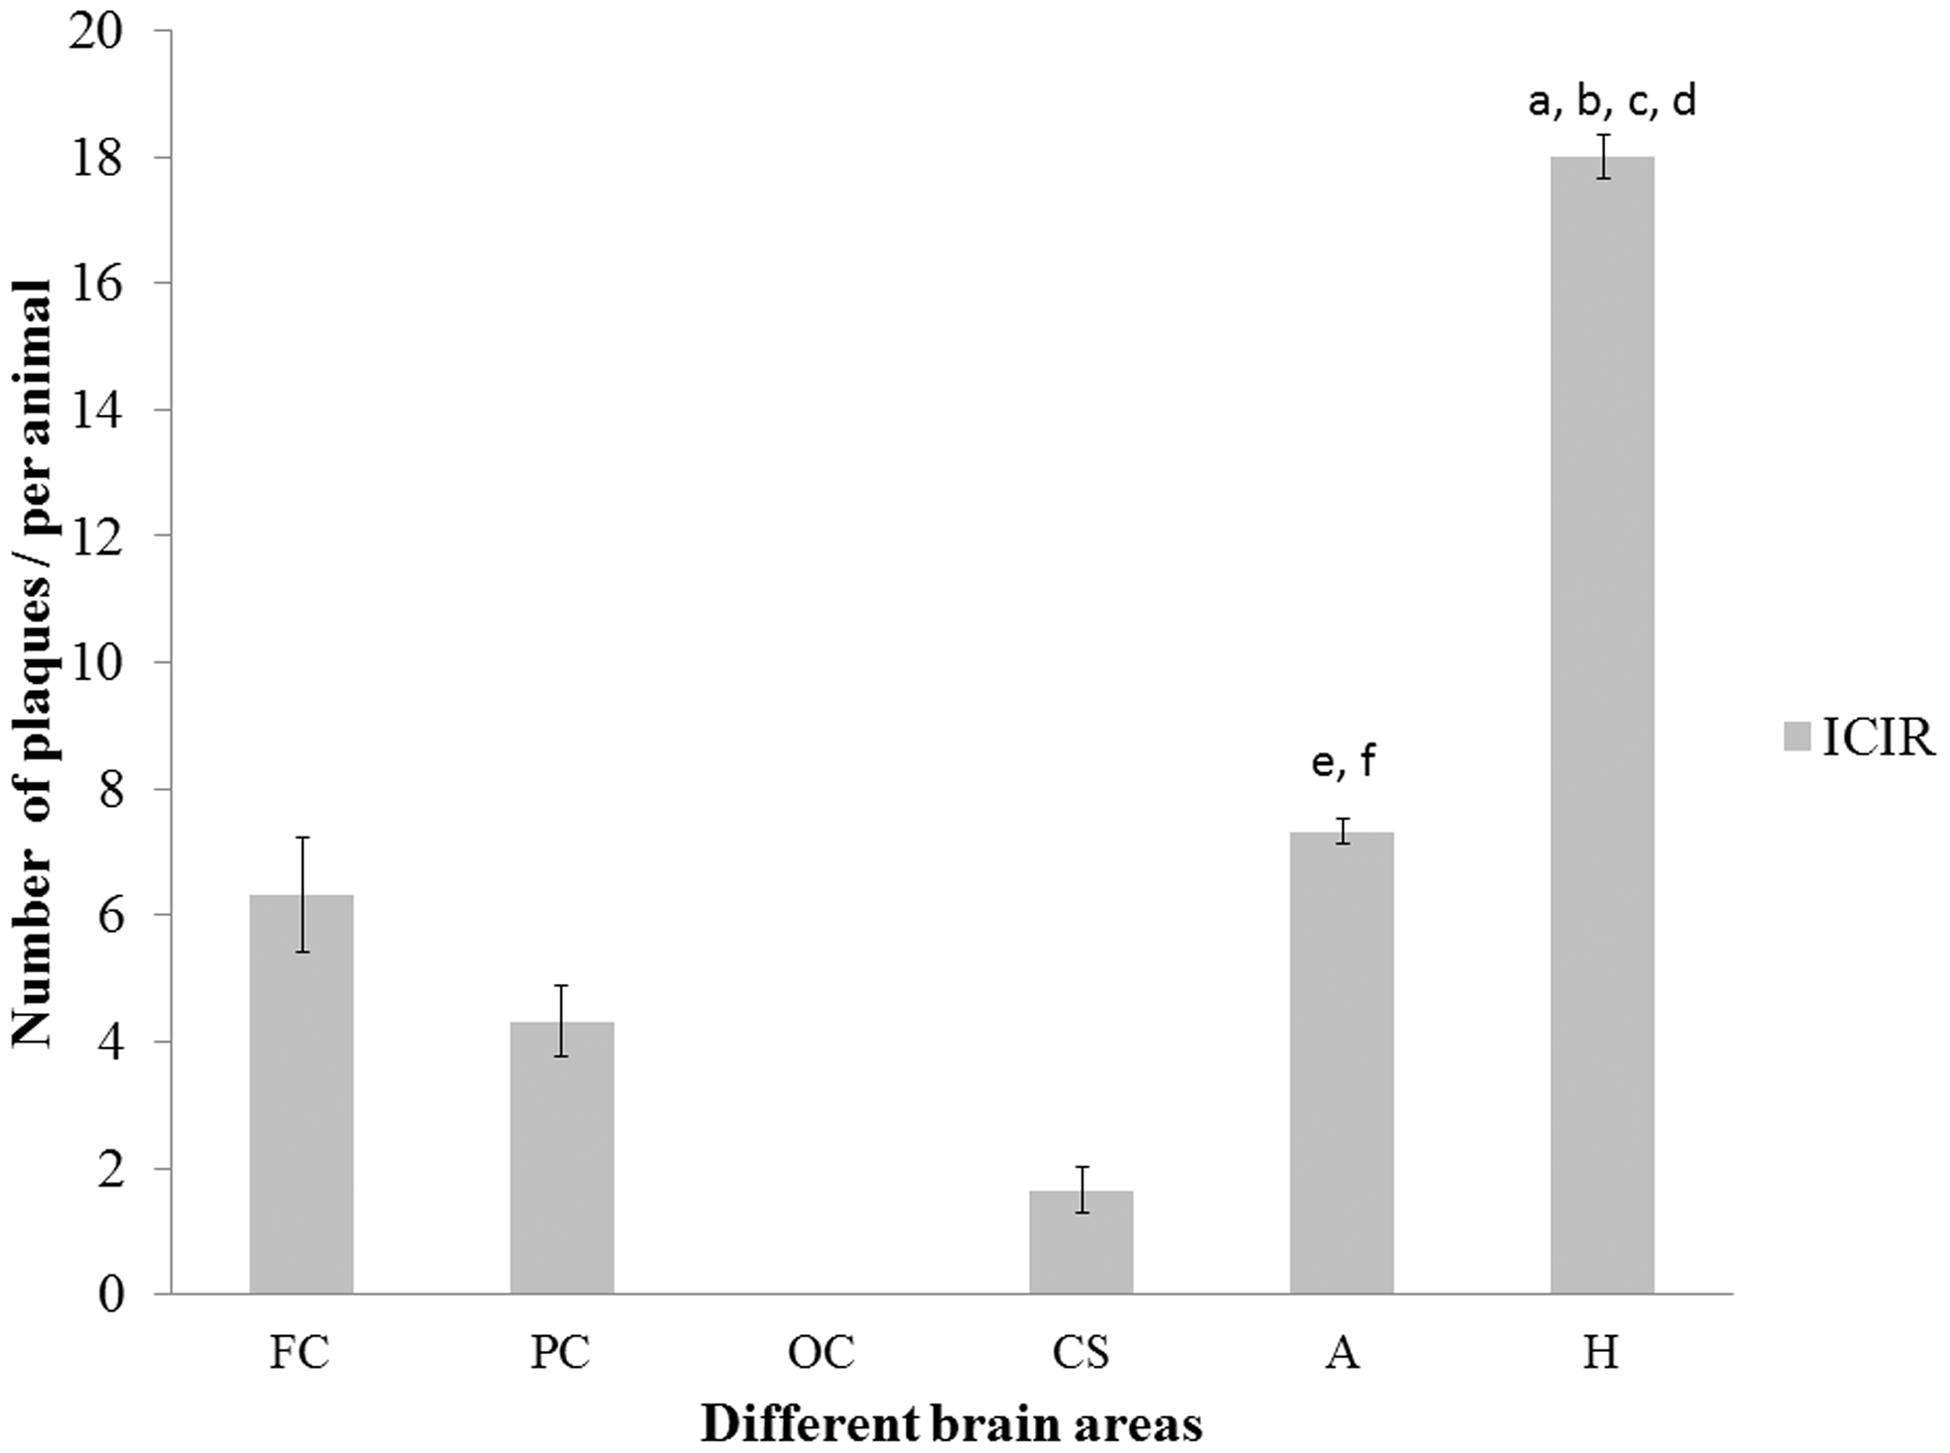 Figure 6. Number of plaques in different brain areas of intracerebroventricular colchicine injected rats (ICIR). Significant difference (p < 0.001) between hippocampus vs (a) frontal cortex; (b) parietal cortex; (c) corpus striatum; and (d) amygdala. Significant at p < 0.001 between amygdala vs (e) parietal cortex or (f) corpus striatum in ICIR hosts. Values shown are means ± SEM (n = 6/group). Abbreviations are as outlined in legend to Figure 3.